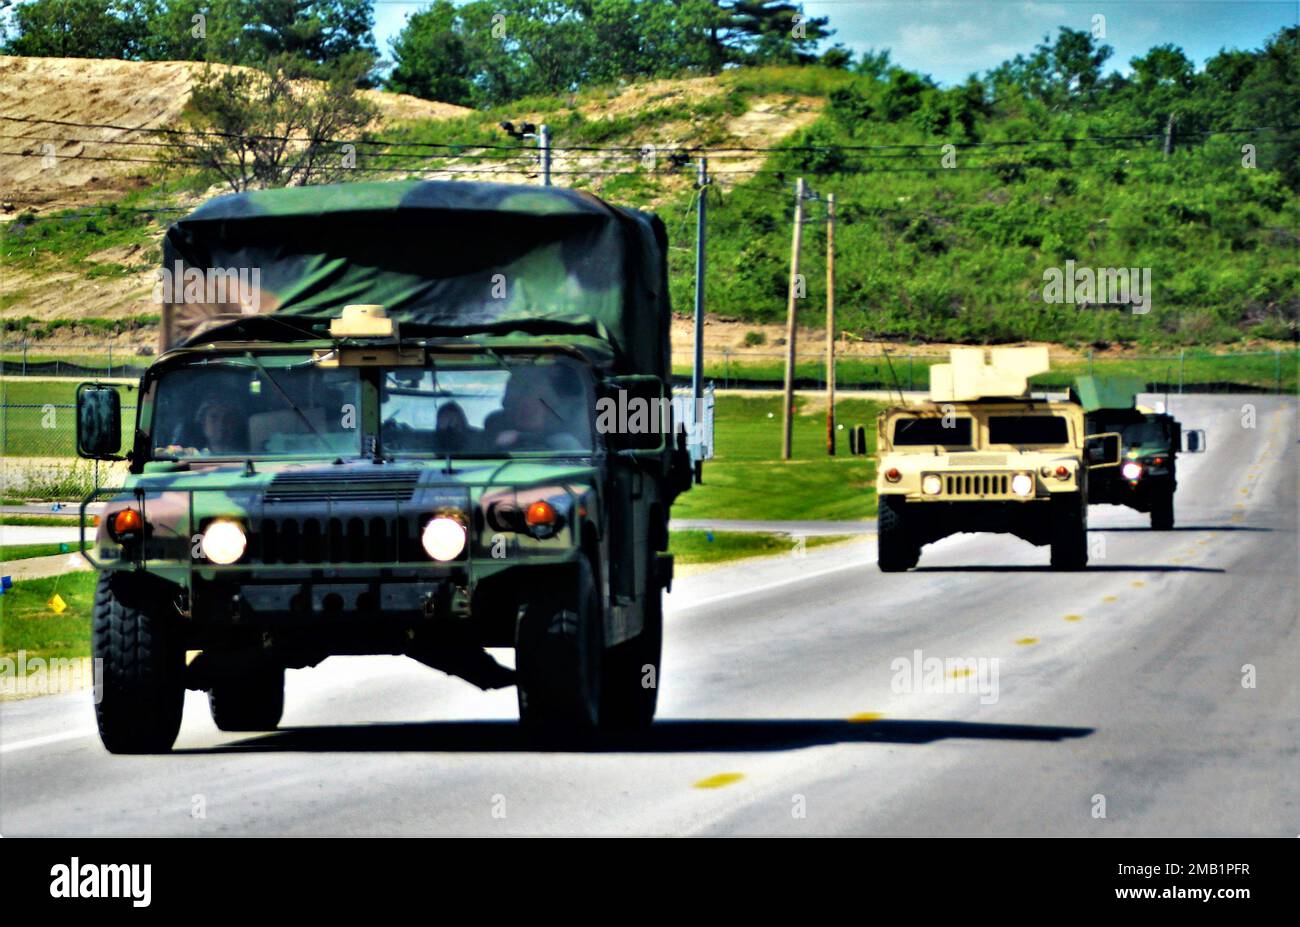 Service members at the installation for training drive military vehicles on post June 9, 2022, at Fort McCoy, Wis. Annually, tens of thousands of troops complete institutional and transient troop training operations at Fort McCoy. During June 2022, thousands of troops also trained at Fort McCoy, including troops from the Wisconsin National Guard and Iowa National Guard. Stock Photo